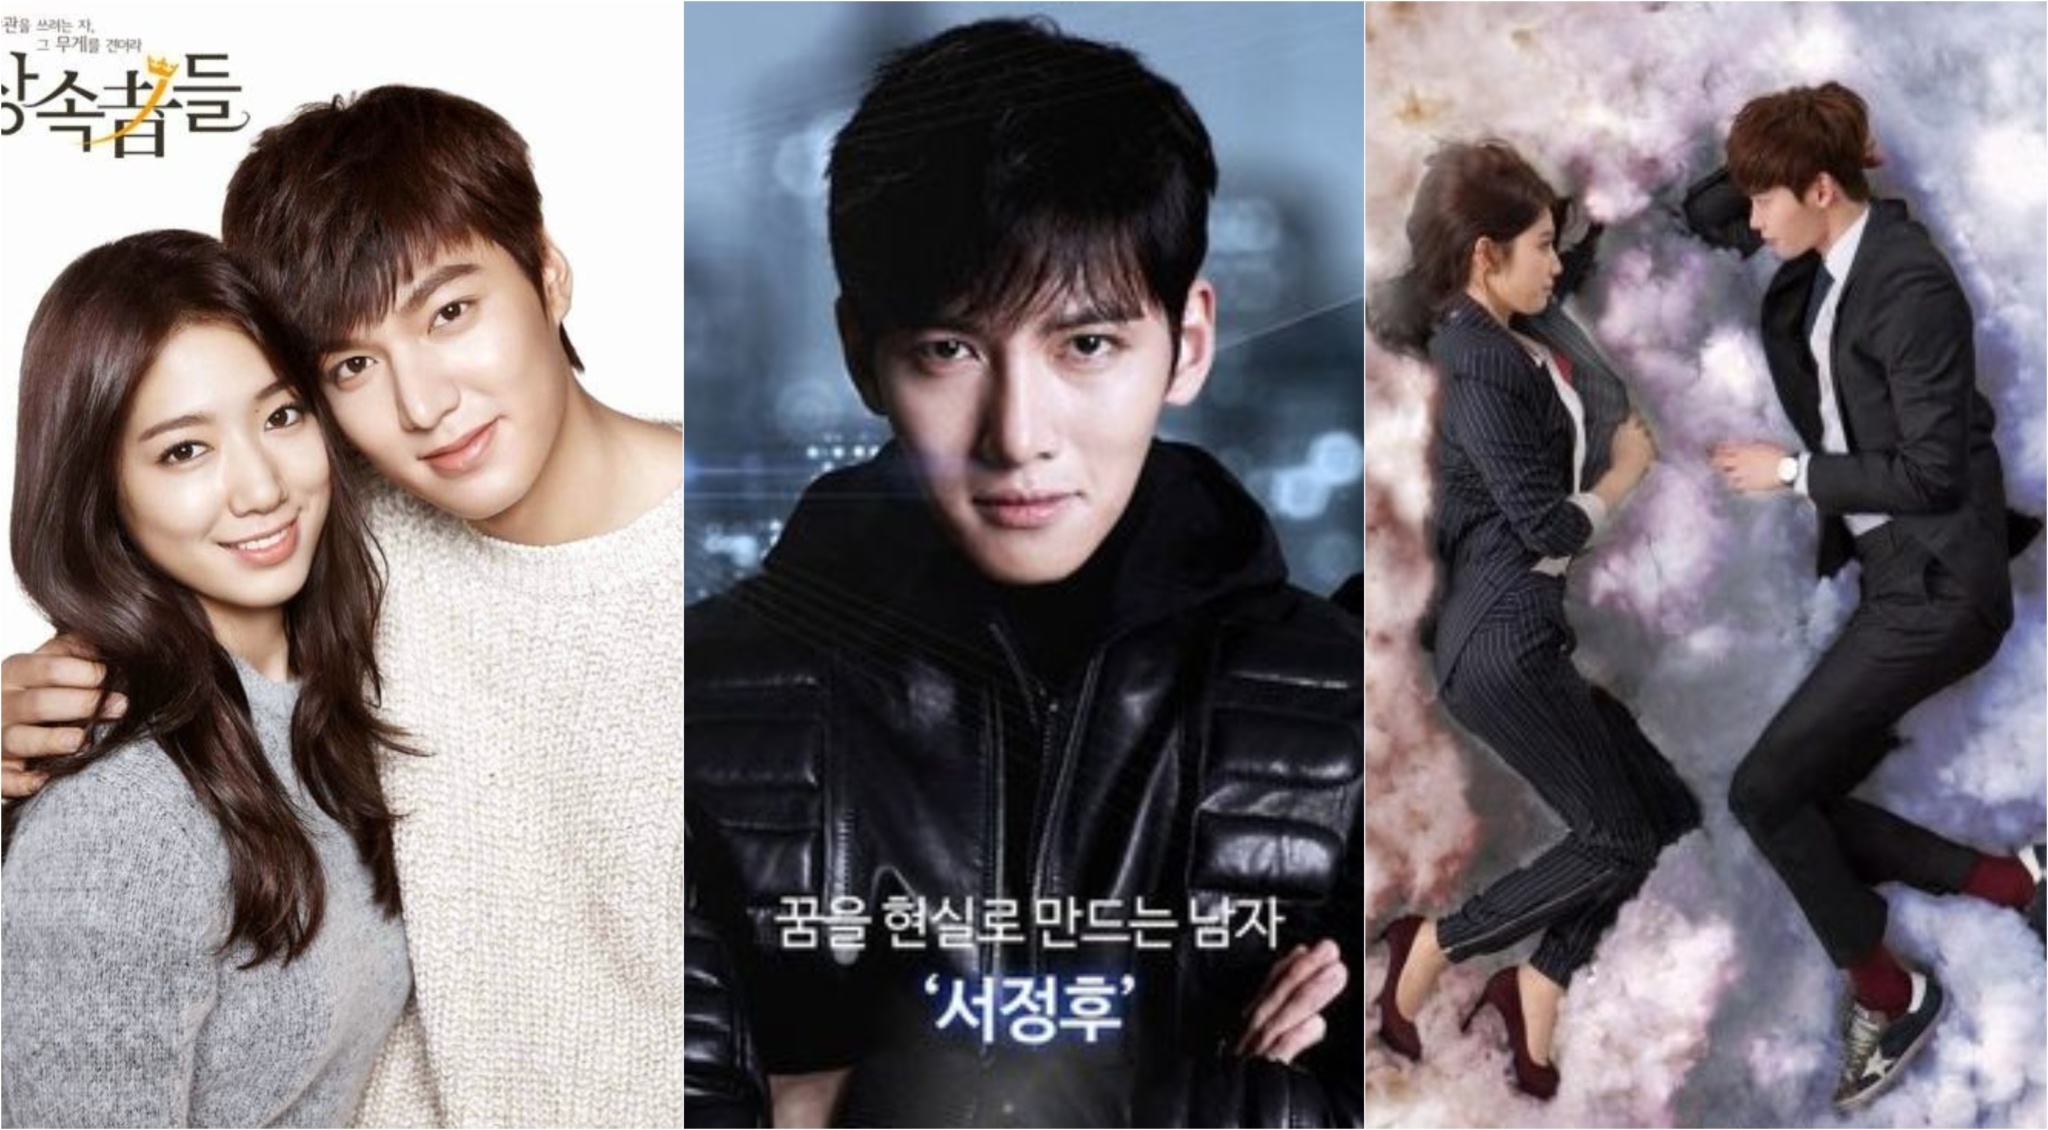 Best Korean Dramas To Watch On YouTube (With English Subtitles) | AlphaGirl Reviews